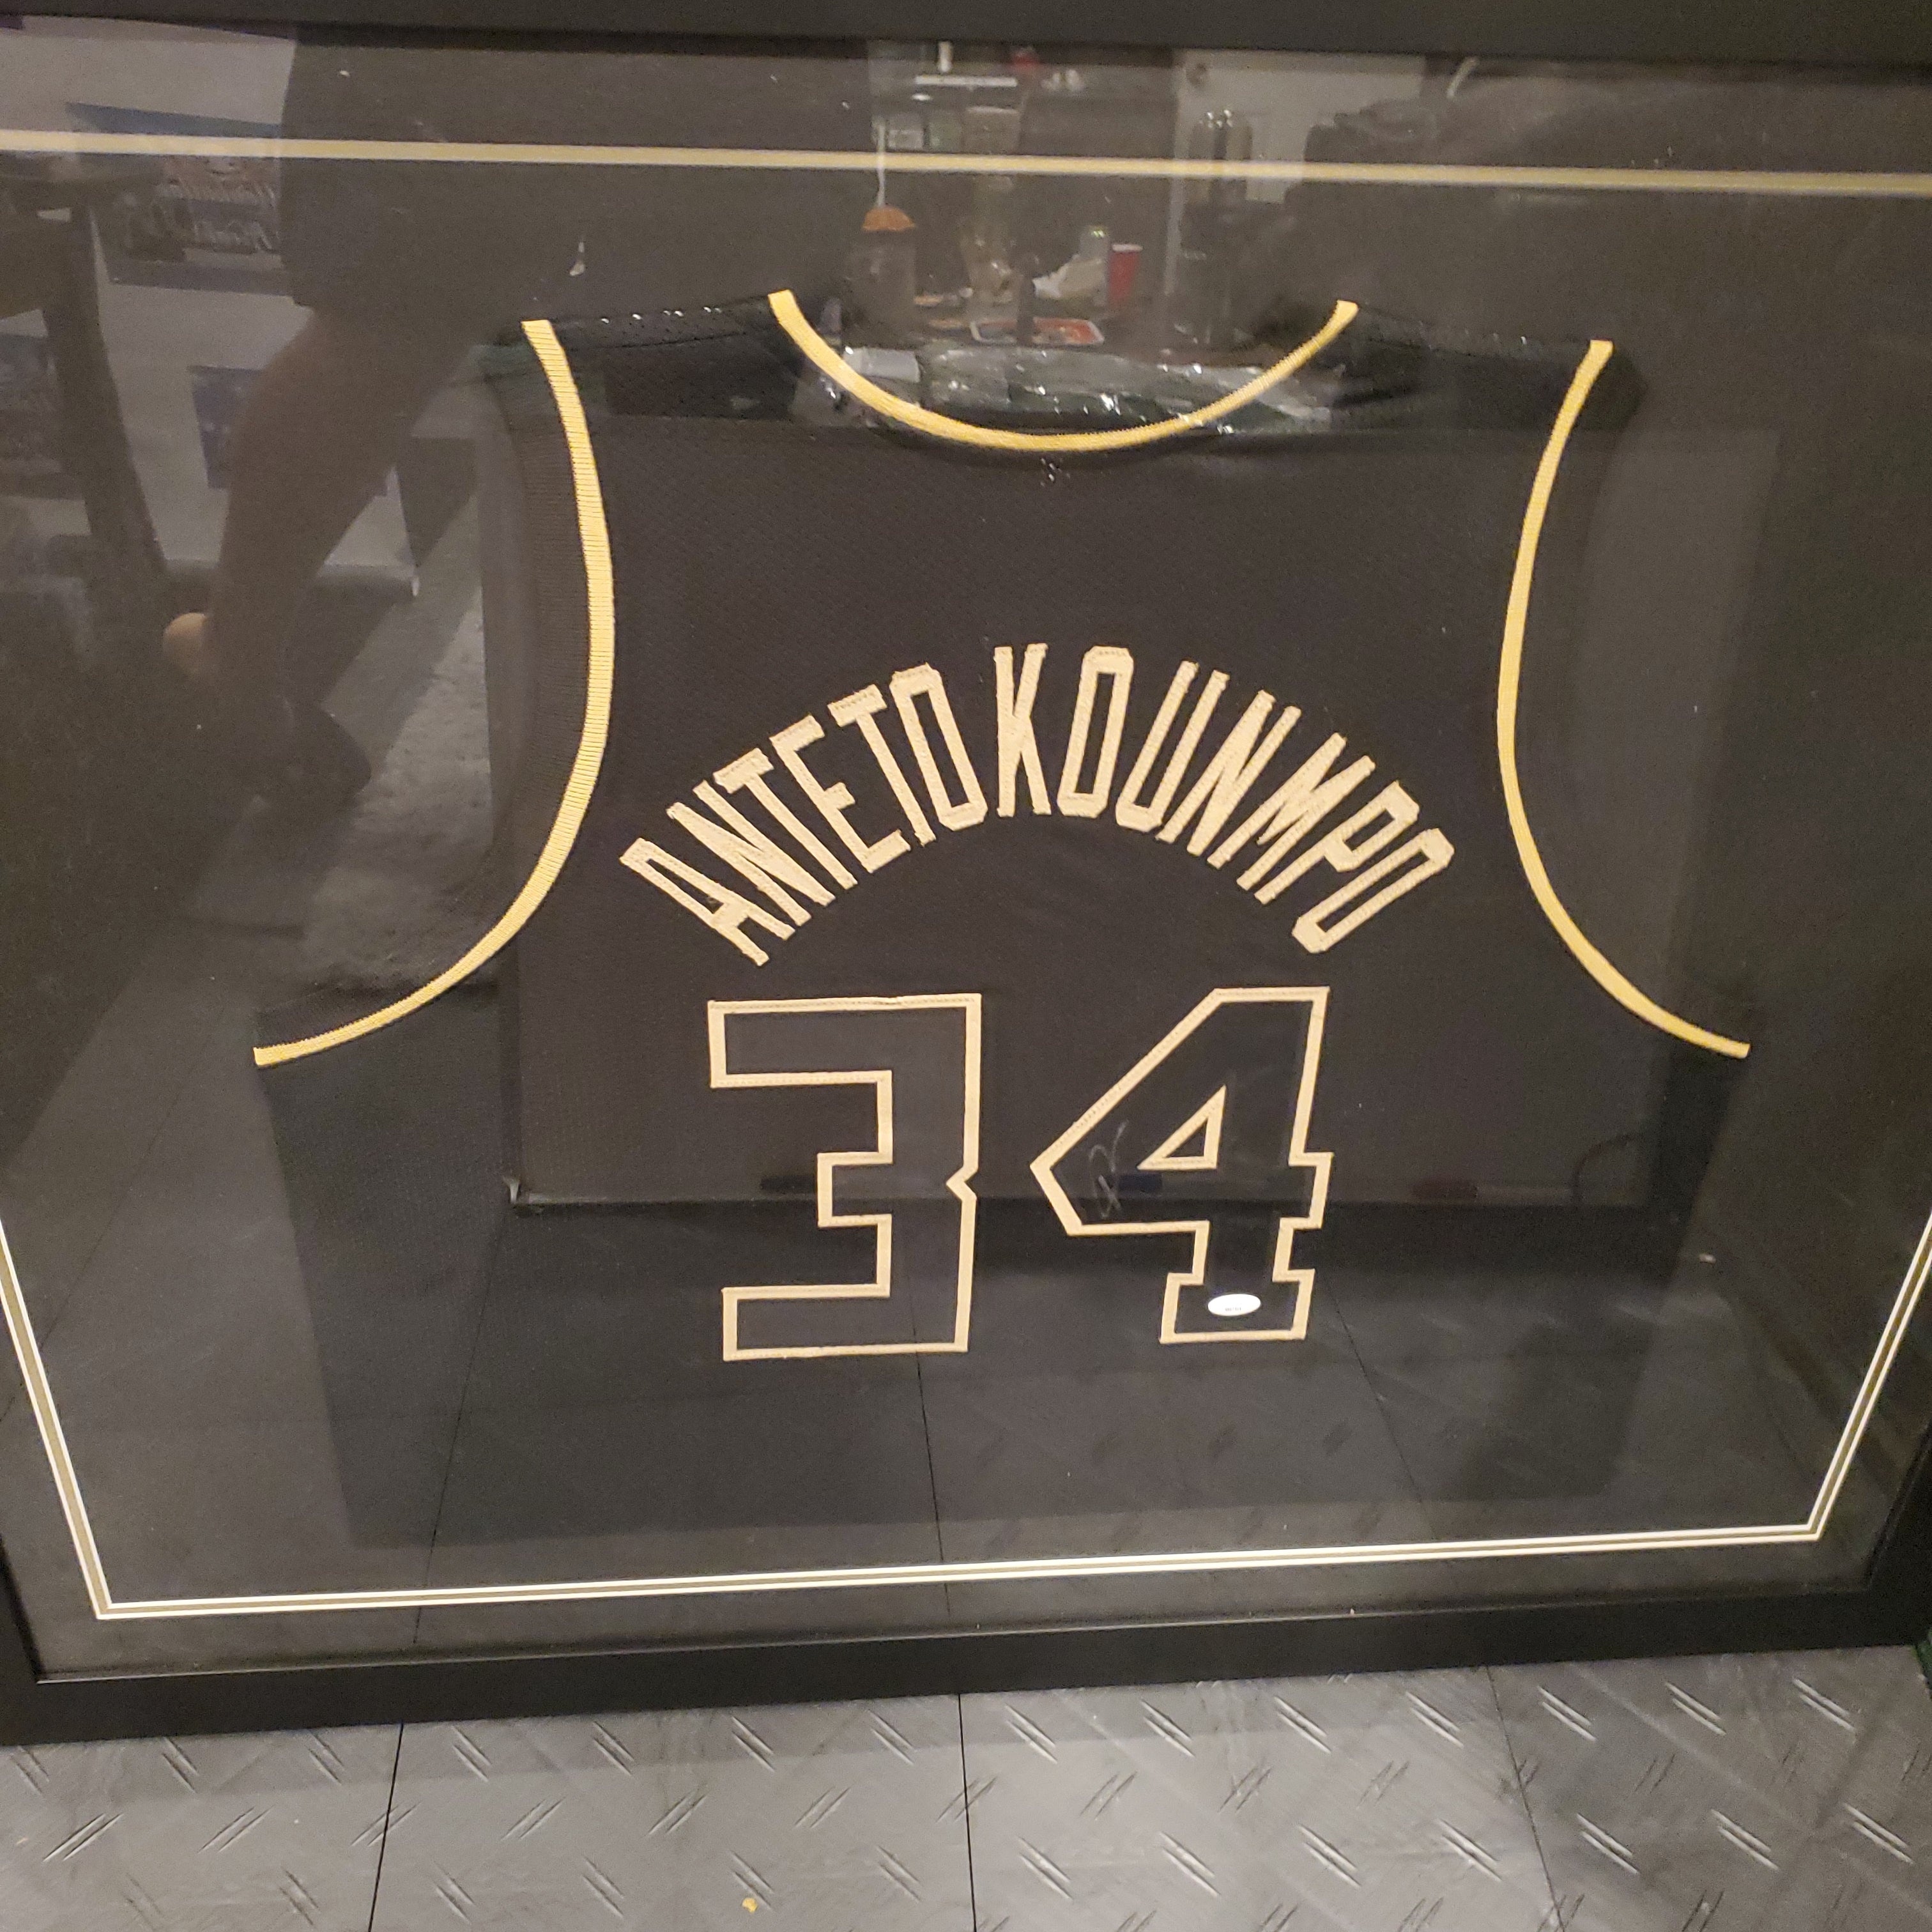 Giannis Antetokounmpo Hand Signed Jersey - Framed